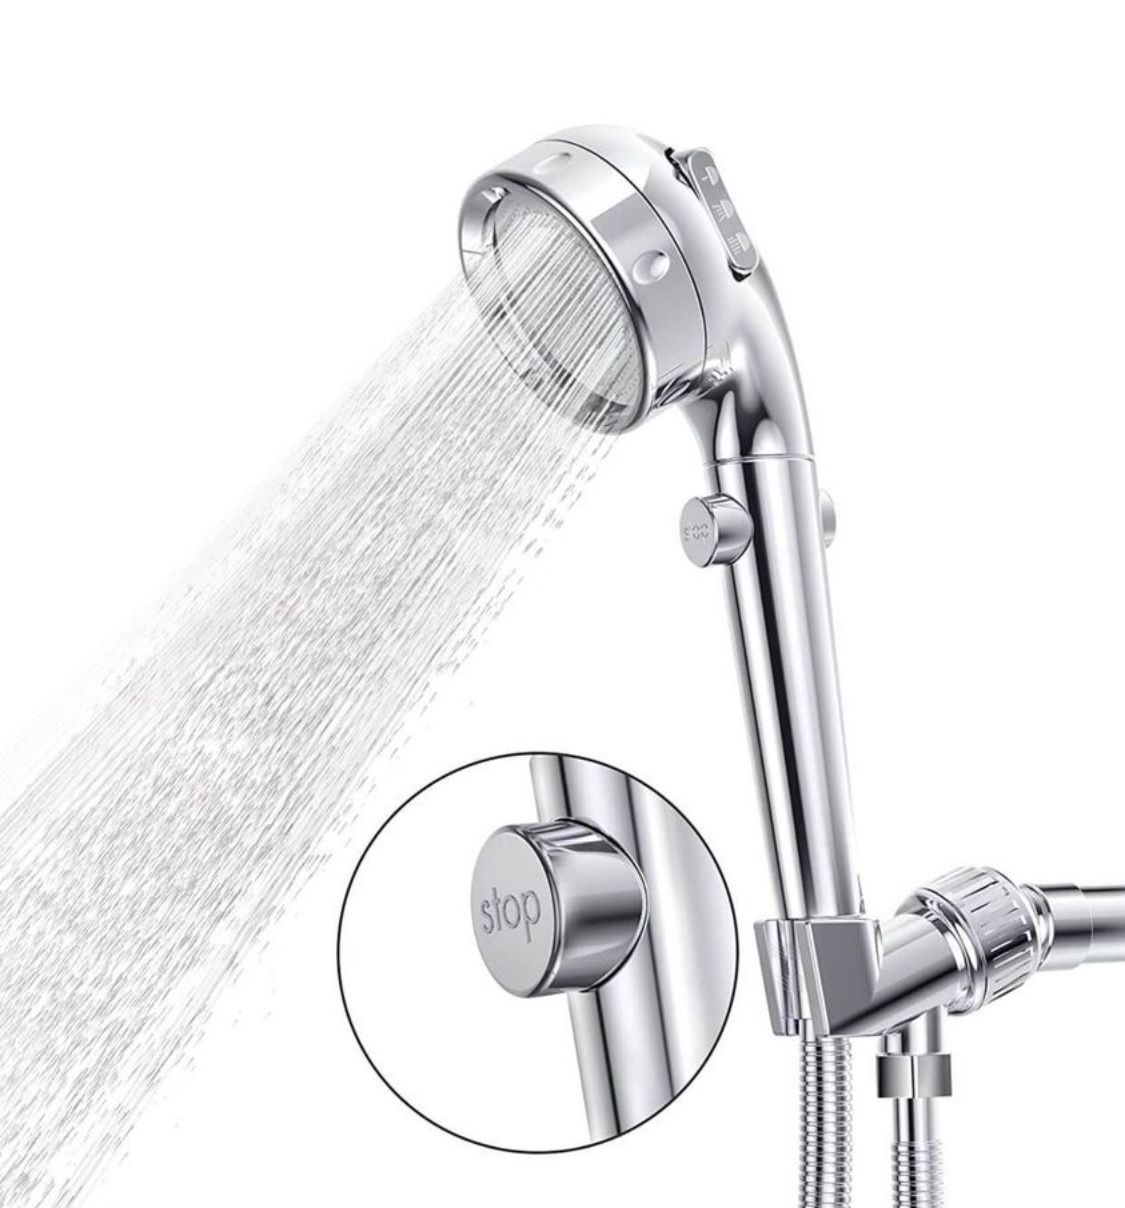 New! High Pressure Shower Head with Detachable Shower Head with ON/OFF Switch, RV Shower Head with Hose and Adjustable Angle Bracket, Built-in Power W